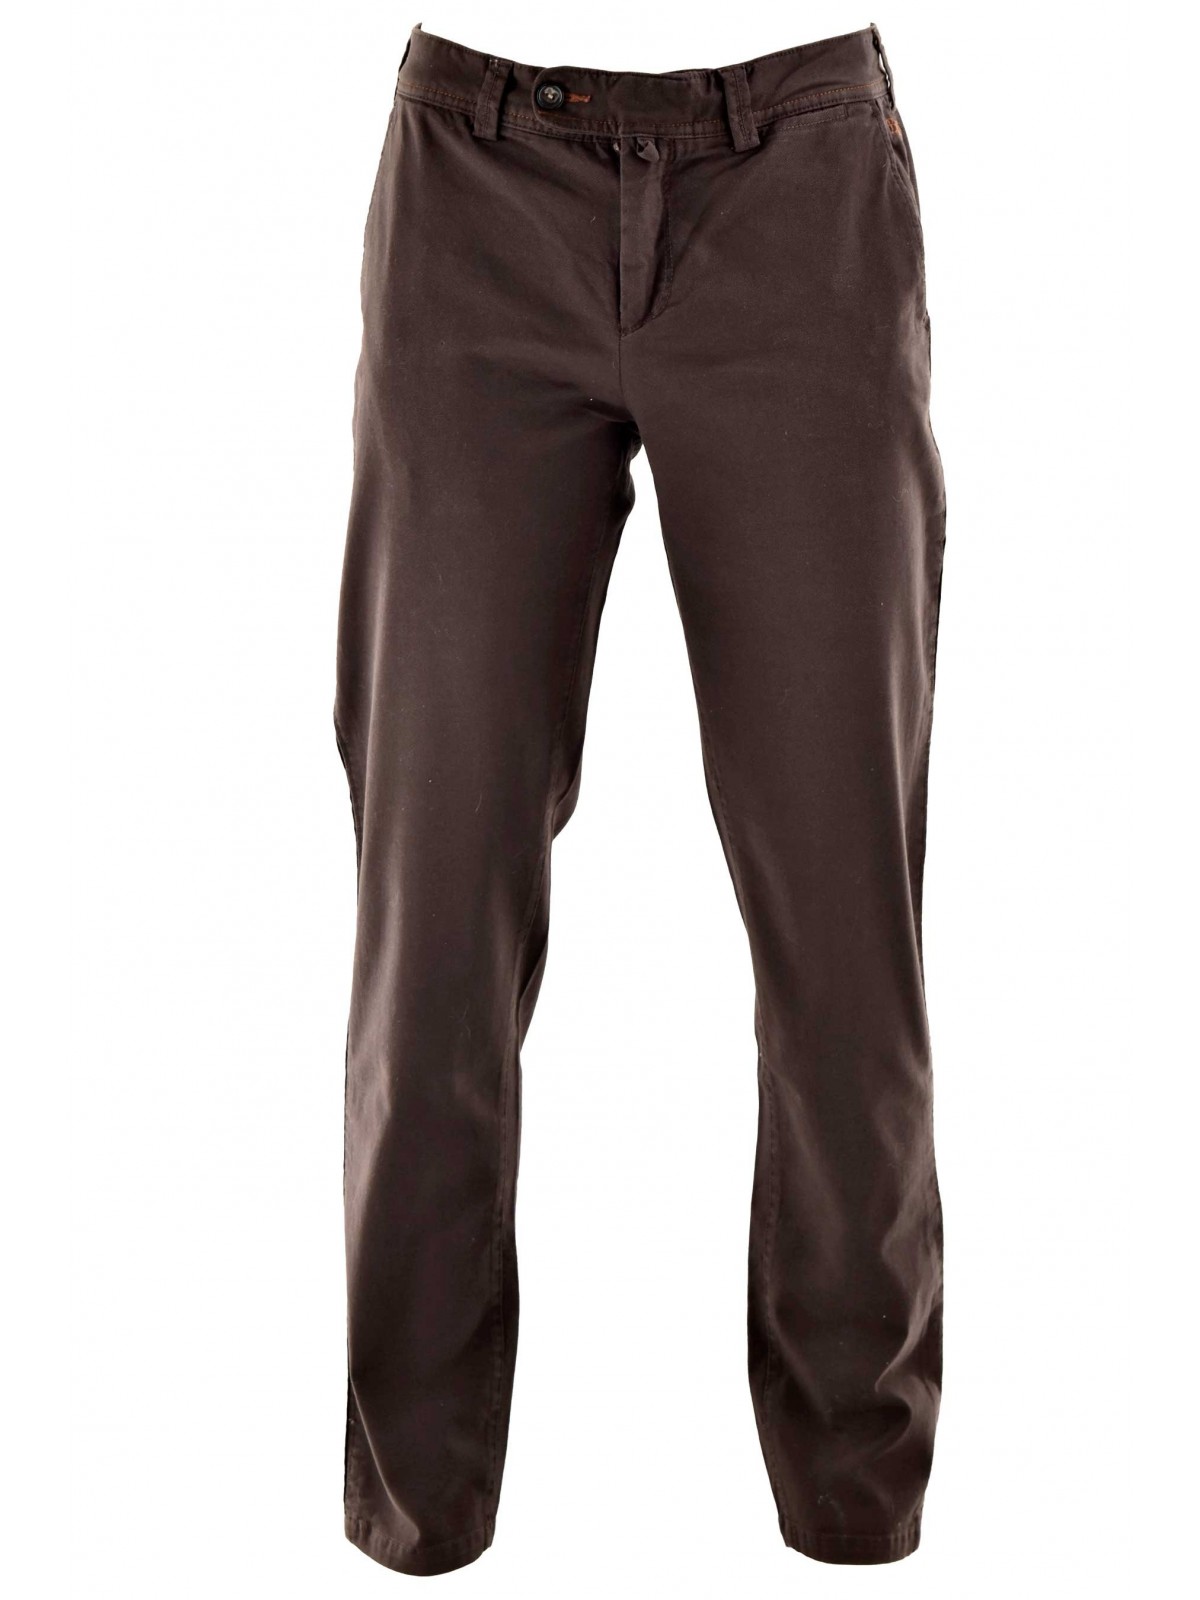 Chino Trousers Man Cotton Brown Casual Side Pockets